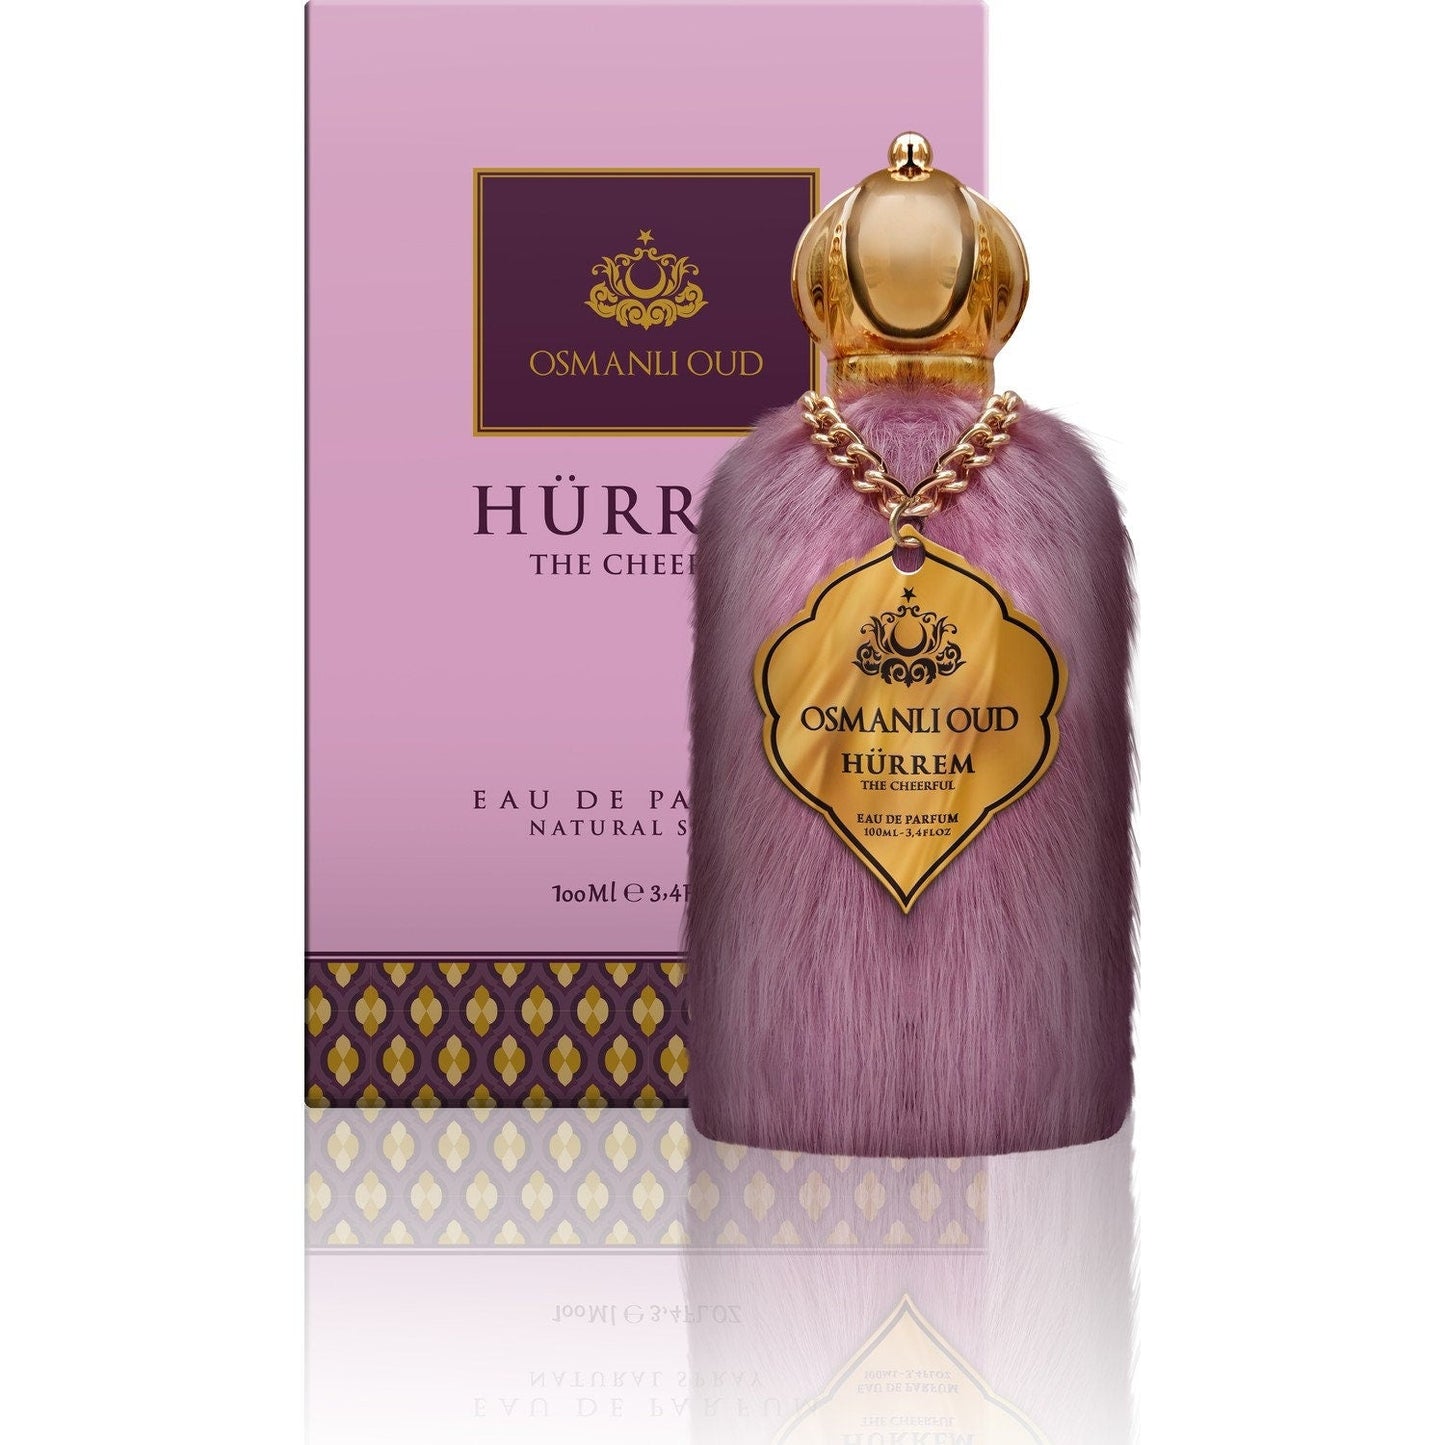 Hurrem and Suleiman Original Perfume SET OF 2, Hurrem "The Cheerful" and Sultan Suleiman "The Magnificent" Gift Set for Lovers, Original Set - Turkish TV Series